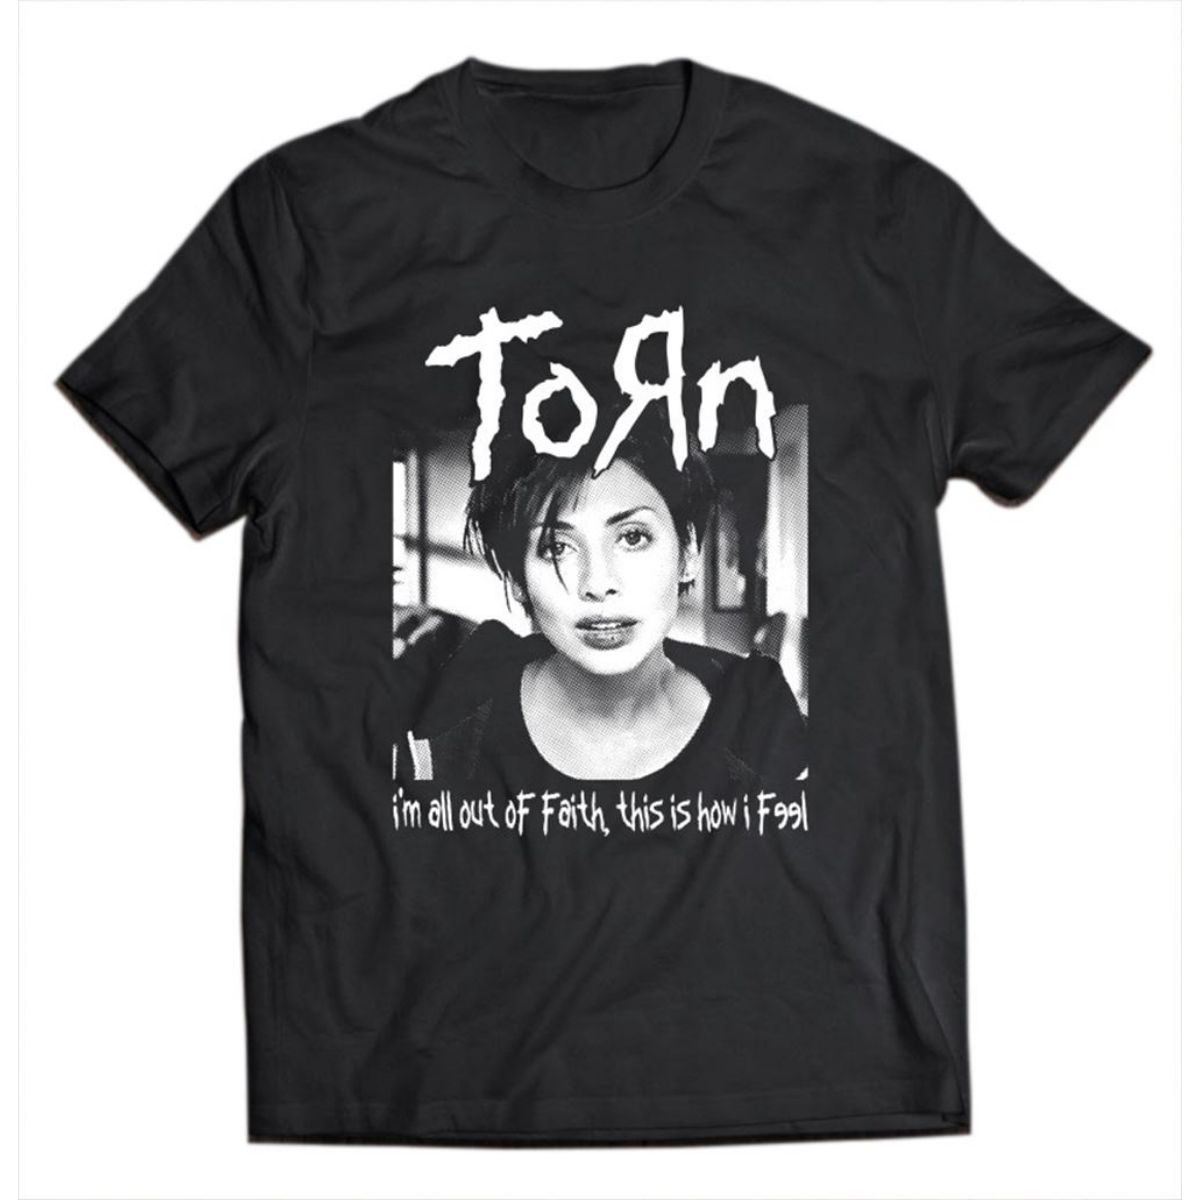 Natalie Imbruglia Torn Lyrics Im All Out Of Faith This Is How I Feel Portrait T-Shirt